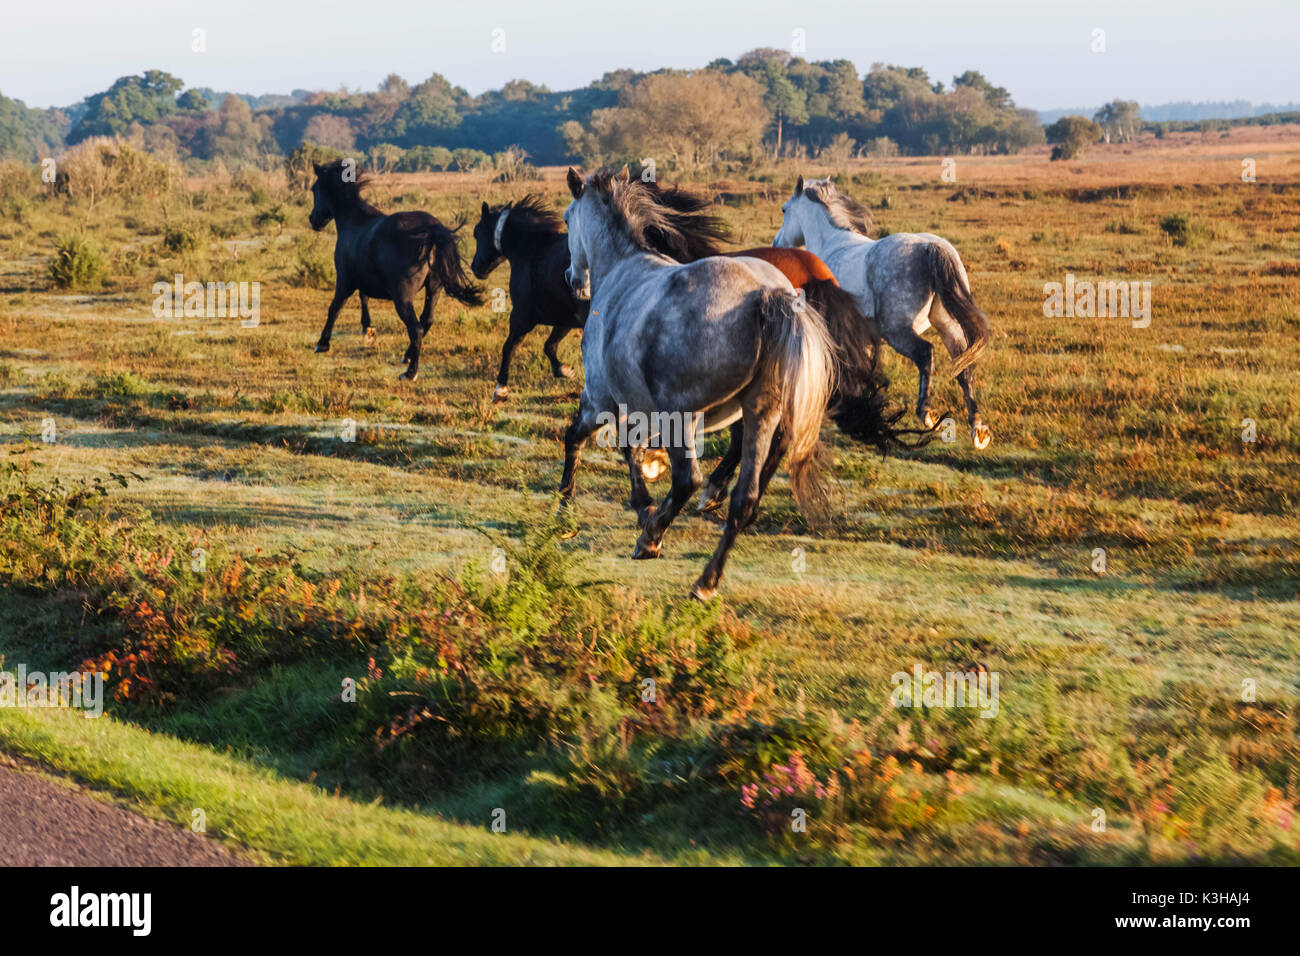 England, Hampshire, New Forest, Horses Galloping Stock Photo